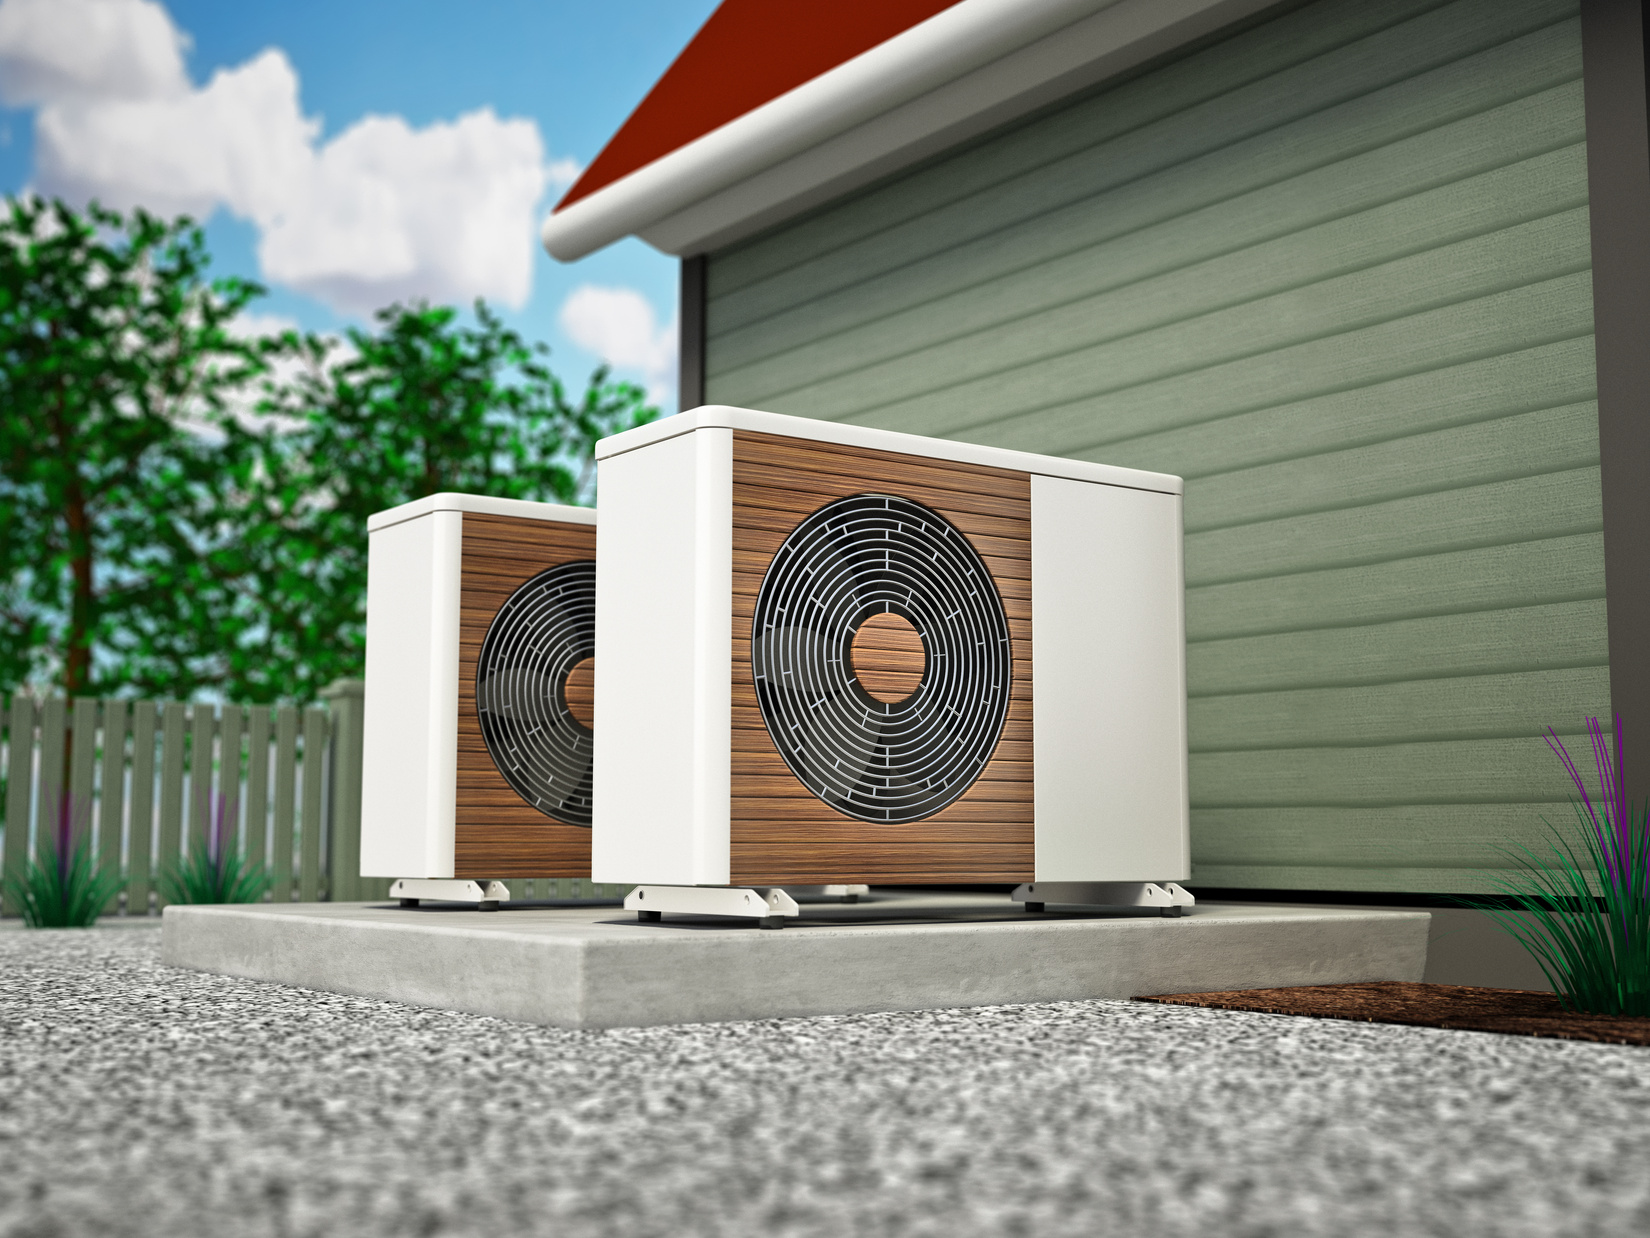 Heat pumps or AC units outside the house